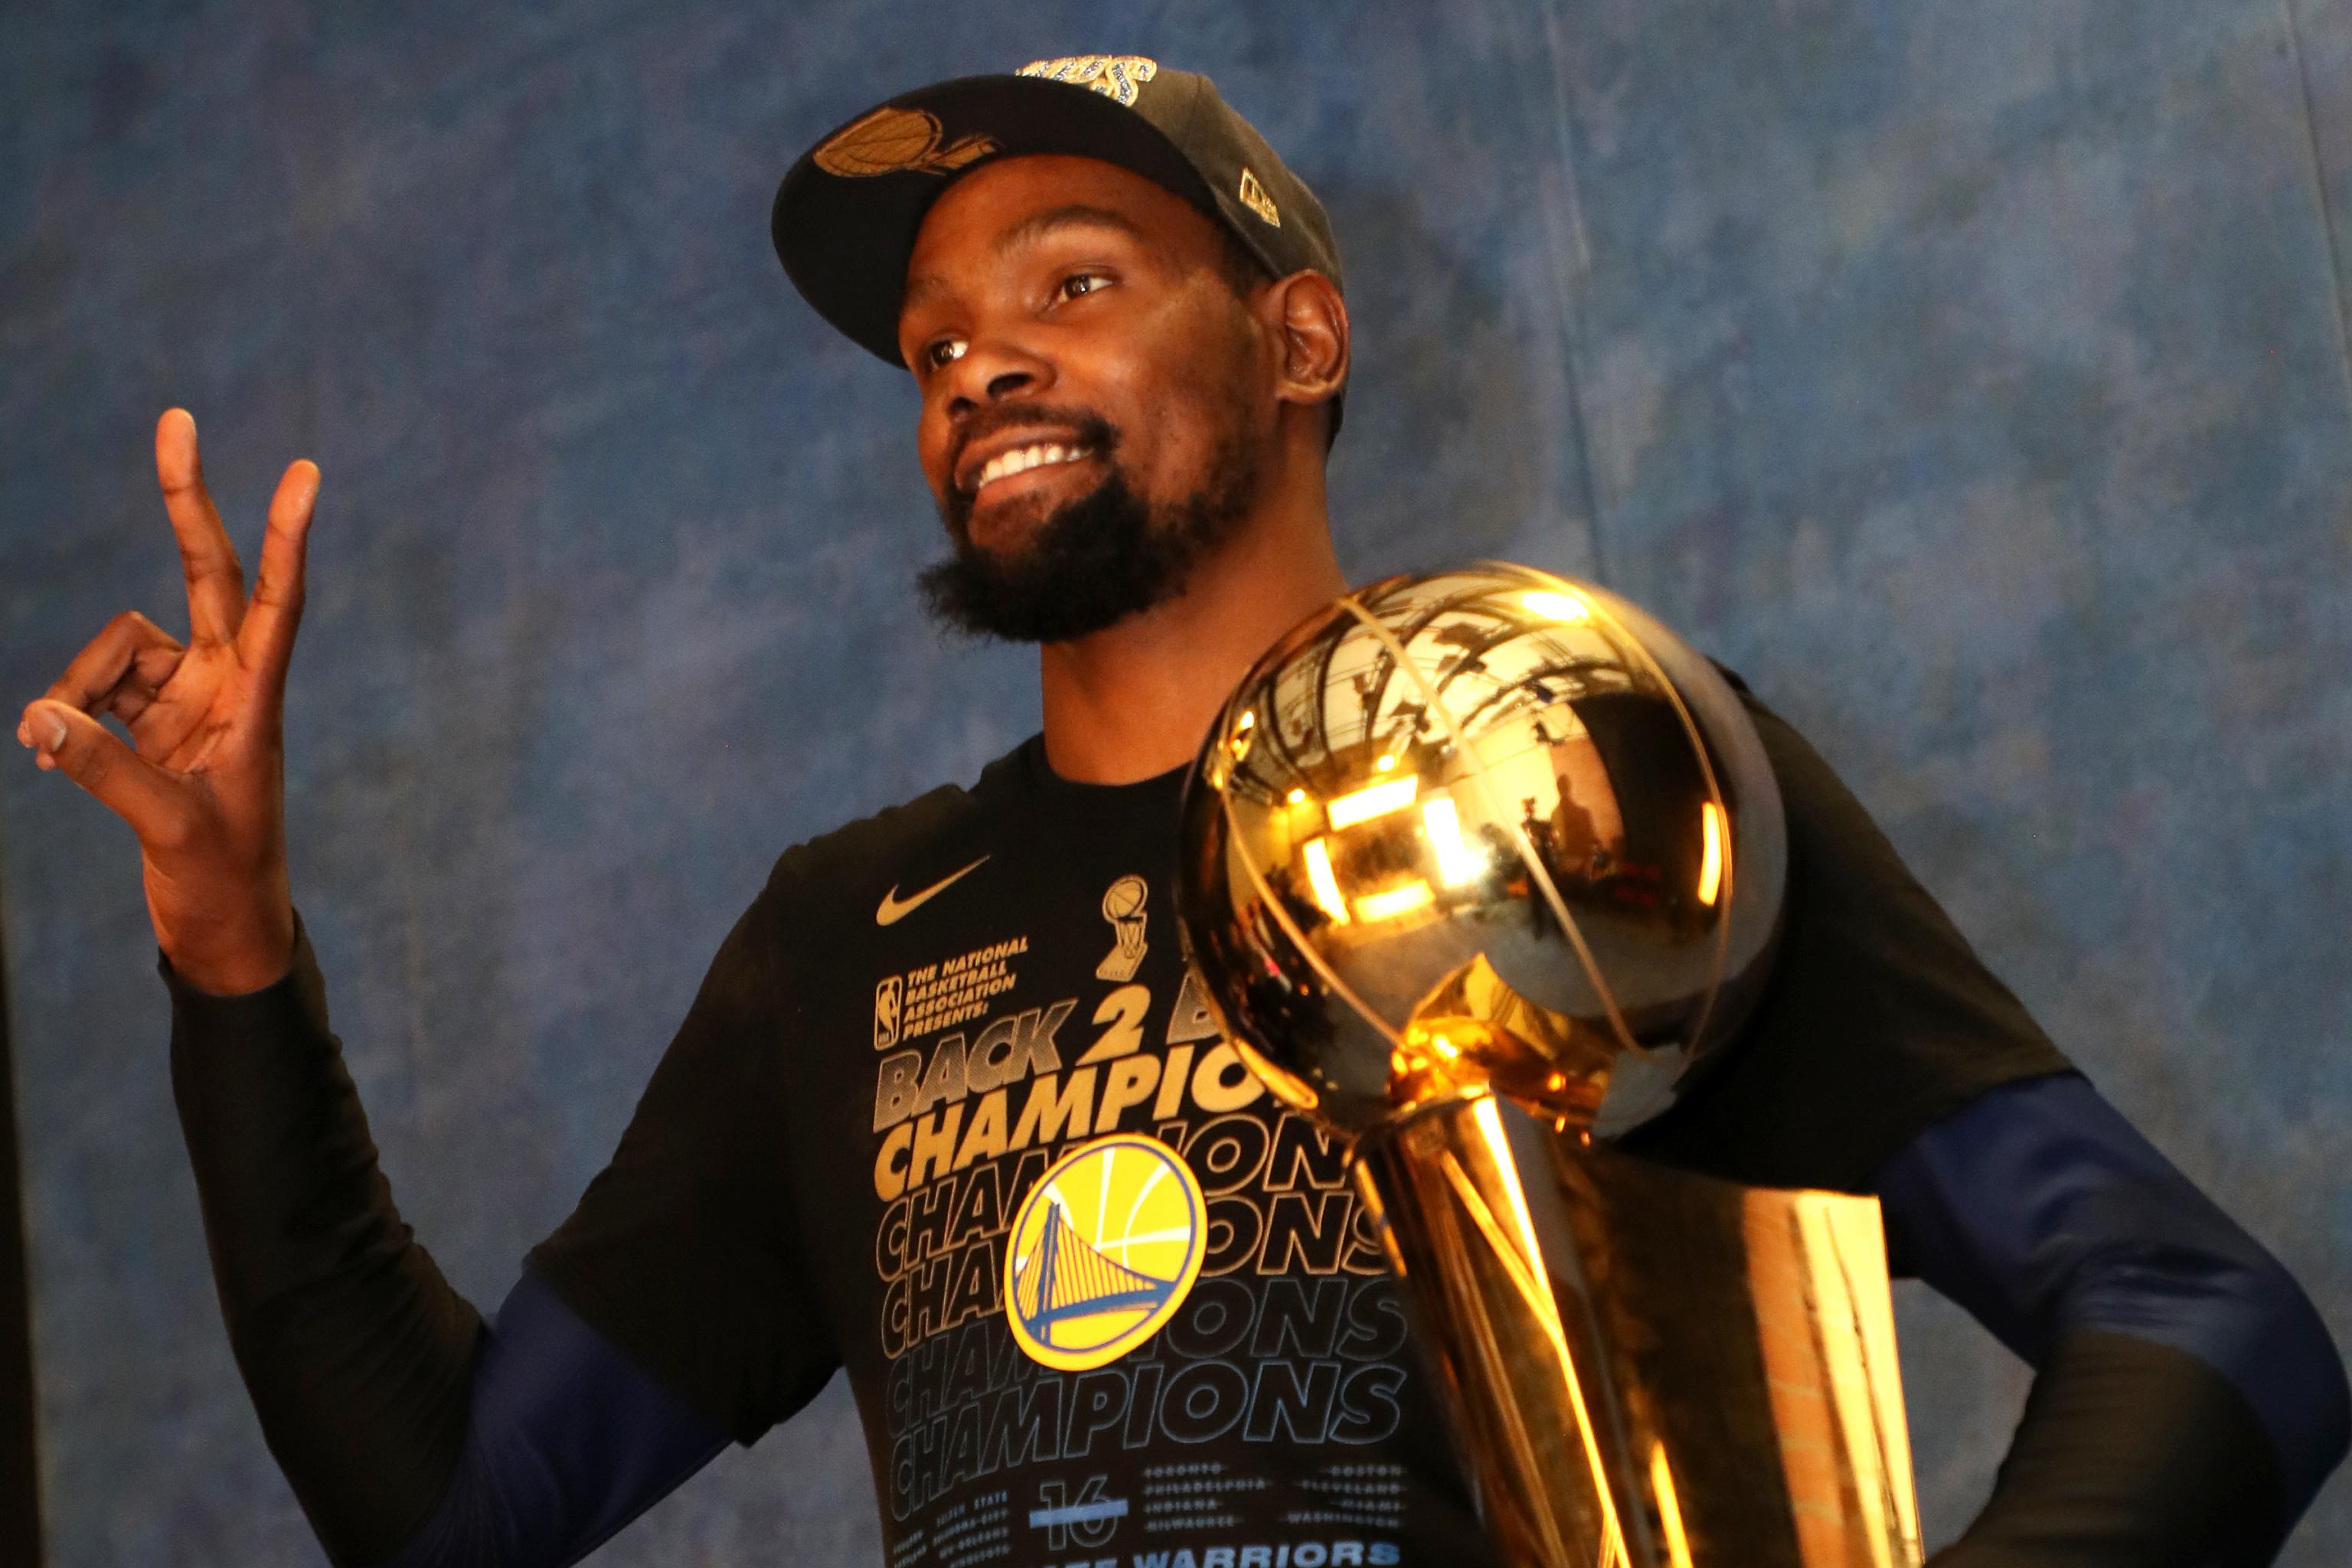 Kevin Durant Rings - How many rings does Kevin Durant have?